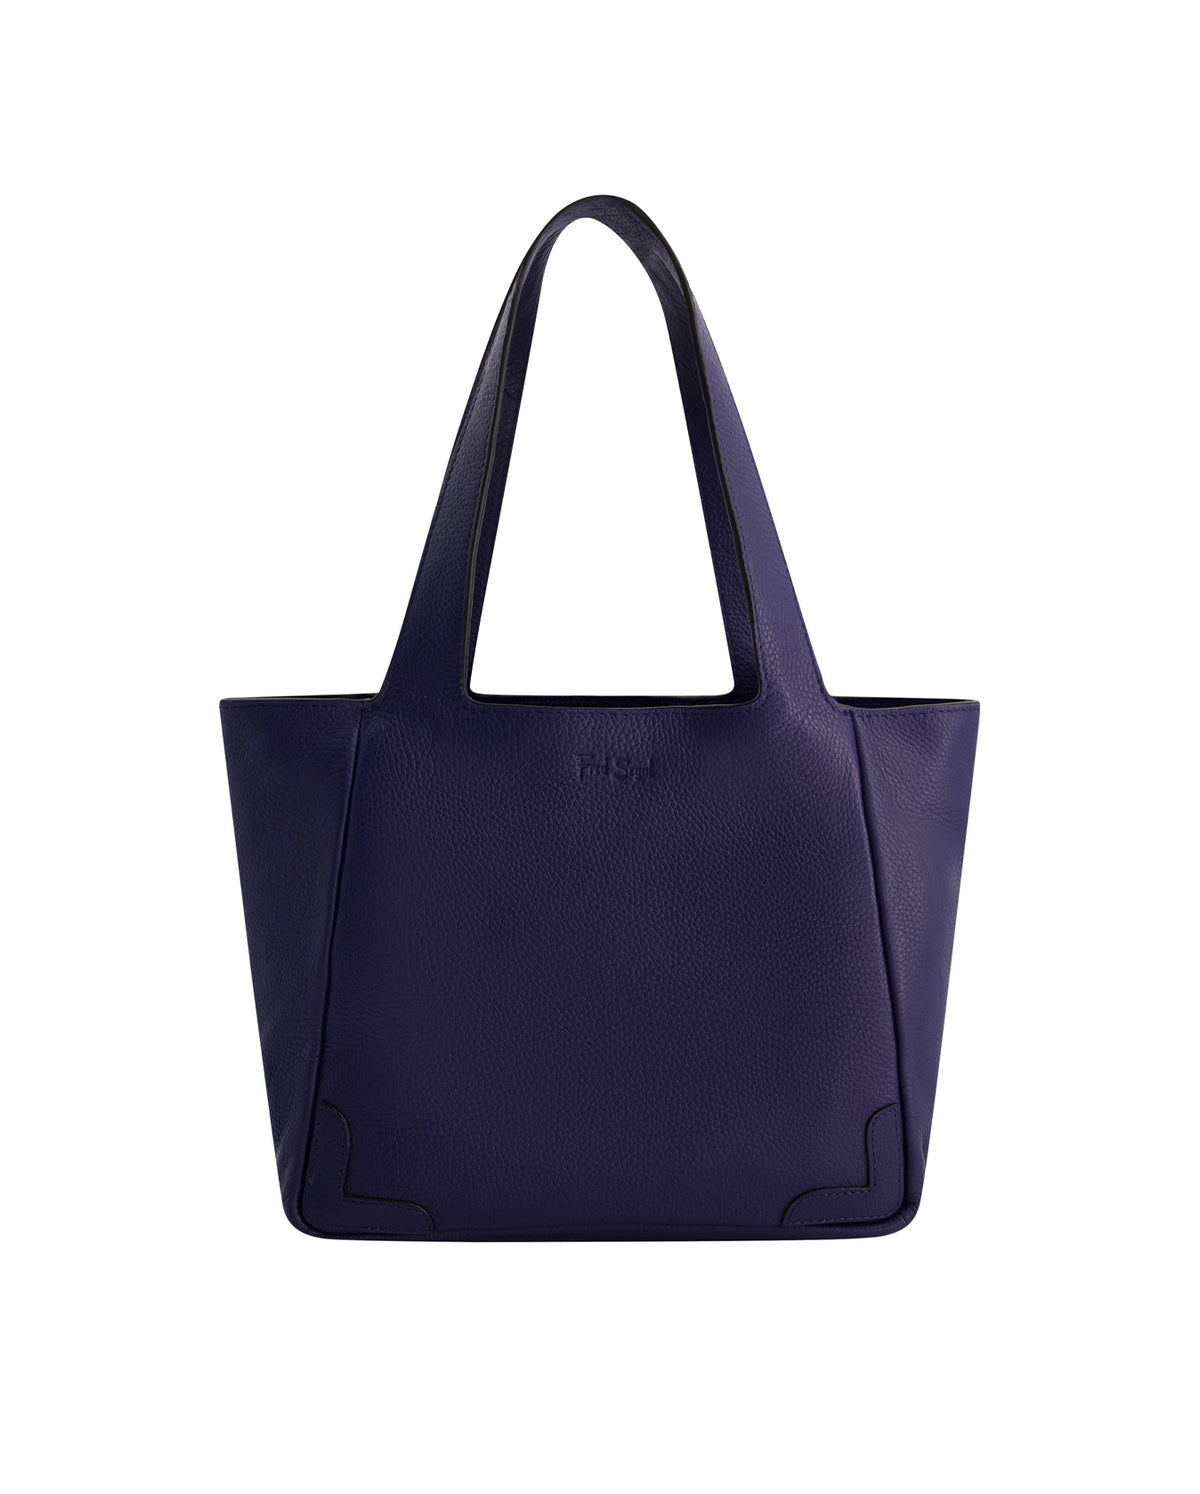 Leather Tote Bag - Midnight